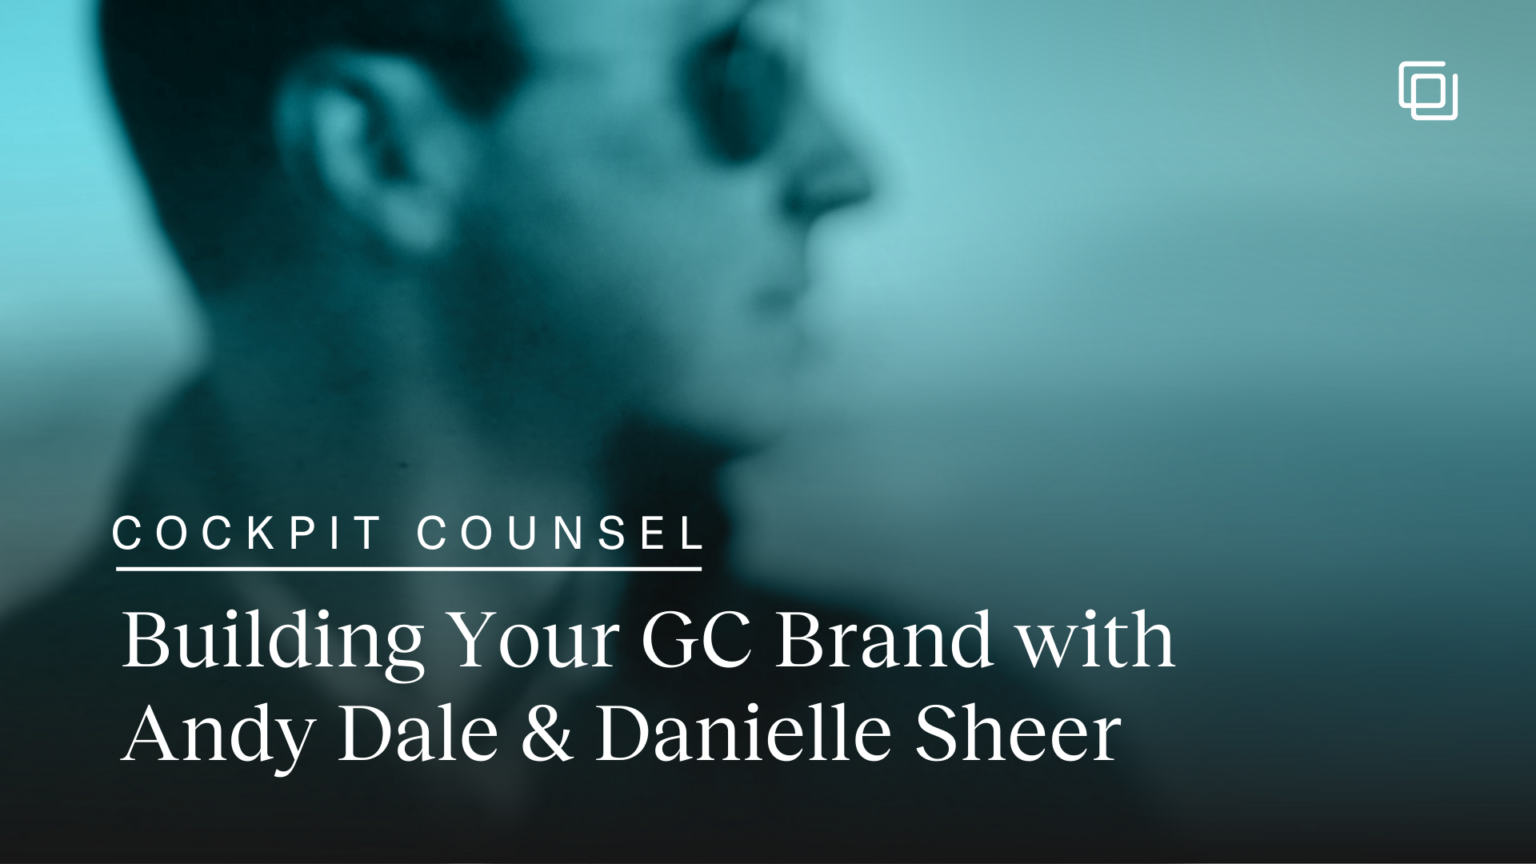 Cockpit Counsel: Building Your GC Brand with Andy Dale and Danielle Sheer